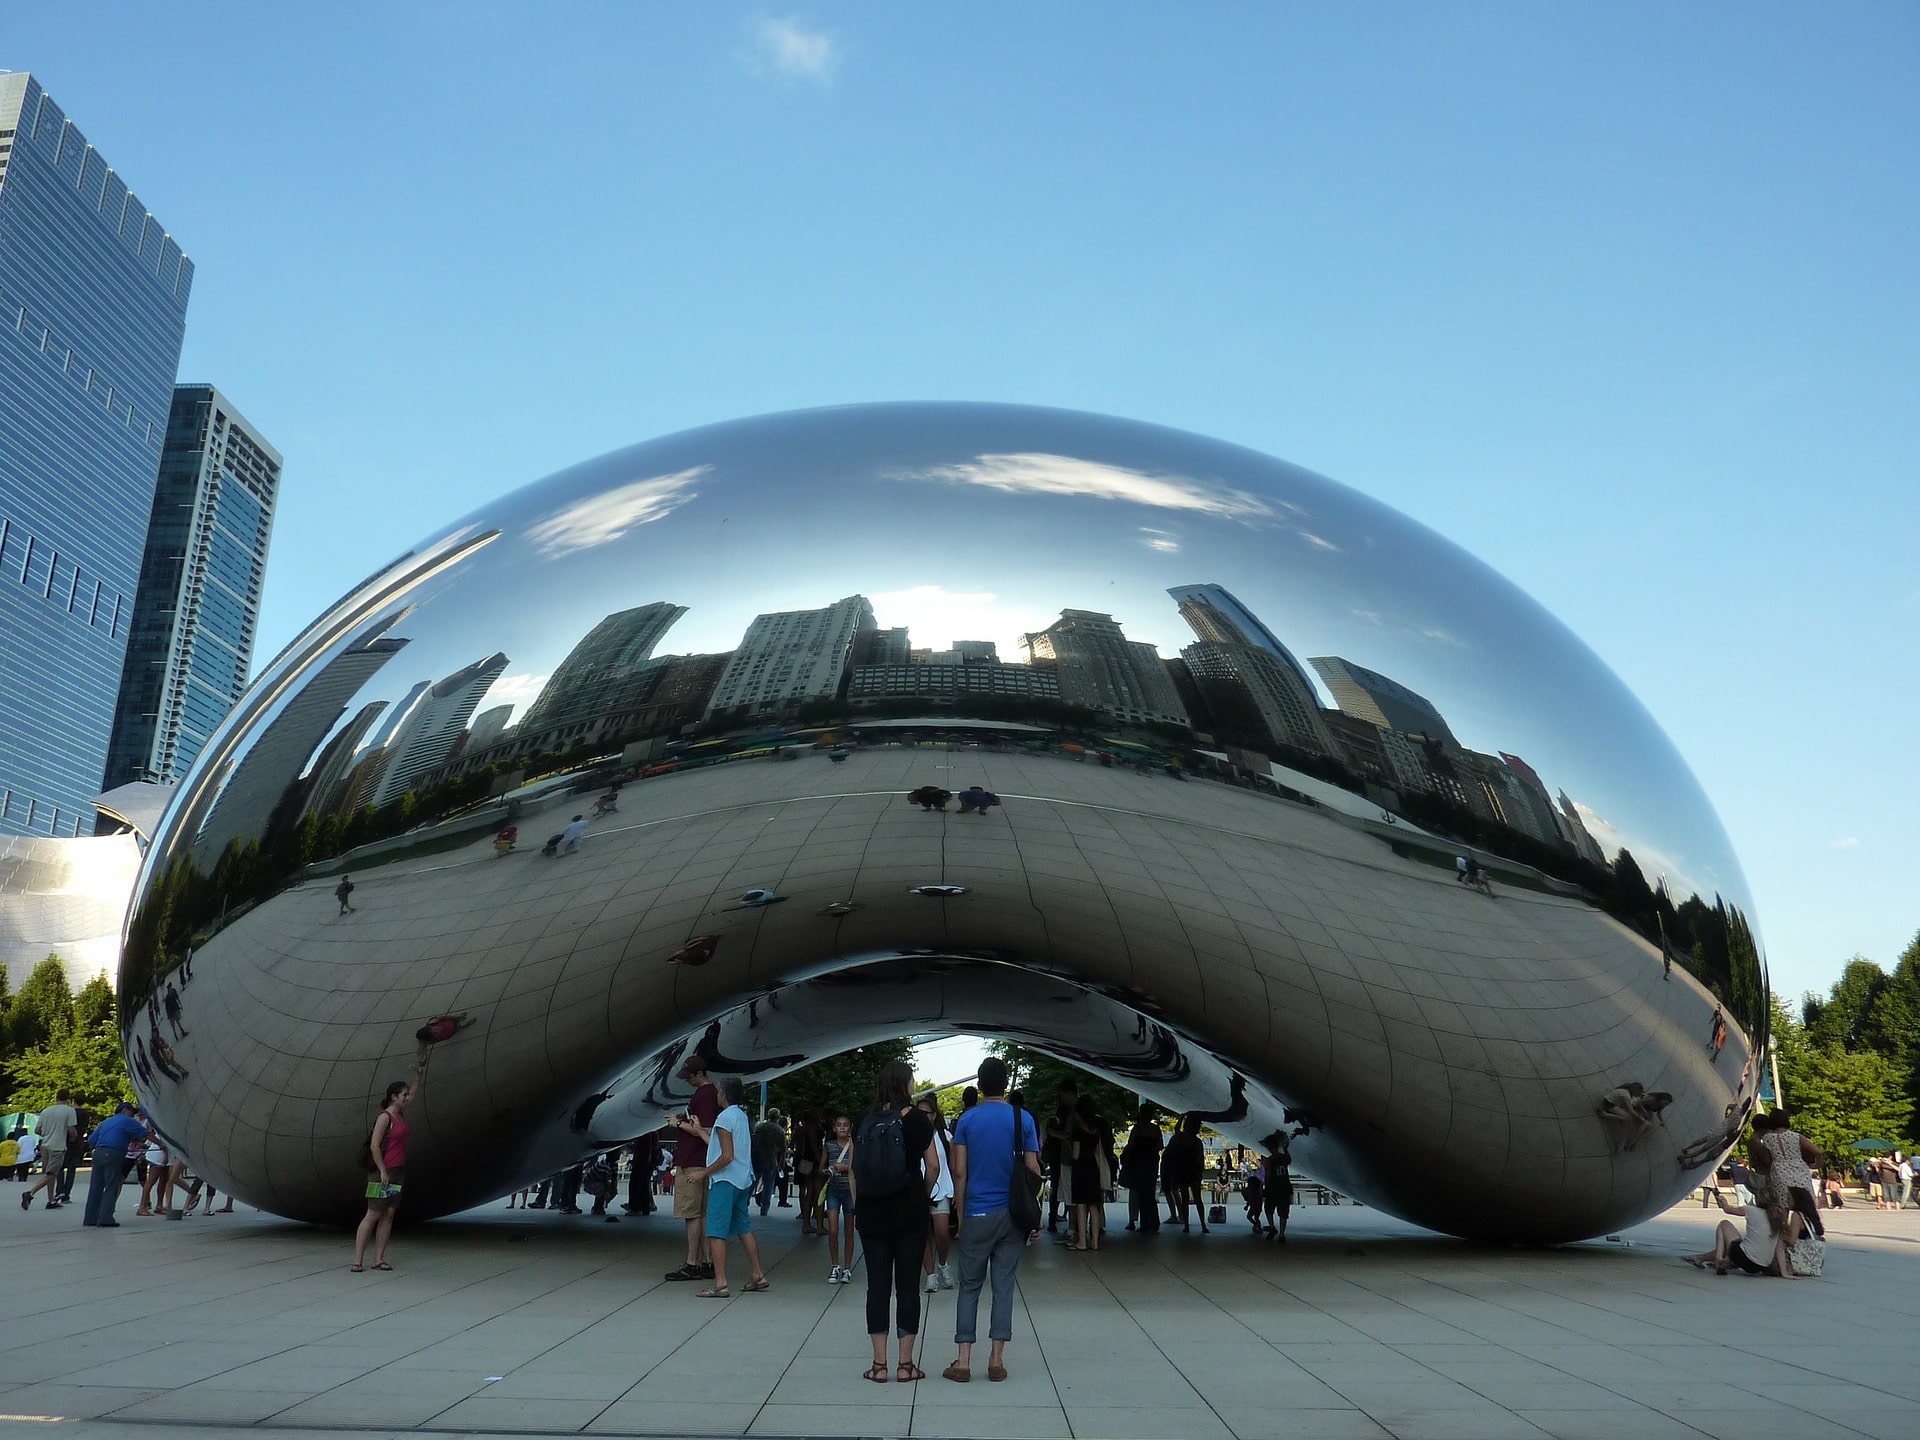 Reflective bean sculpture surrounded by tourists.